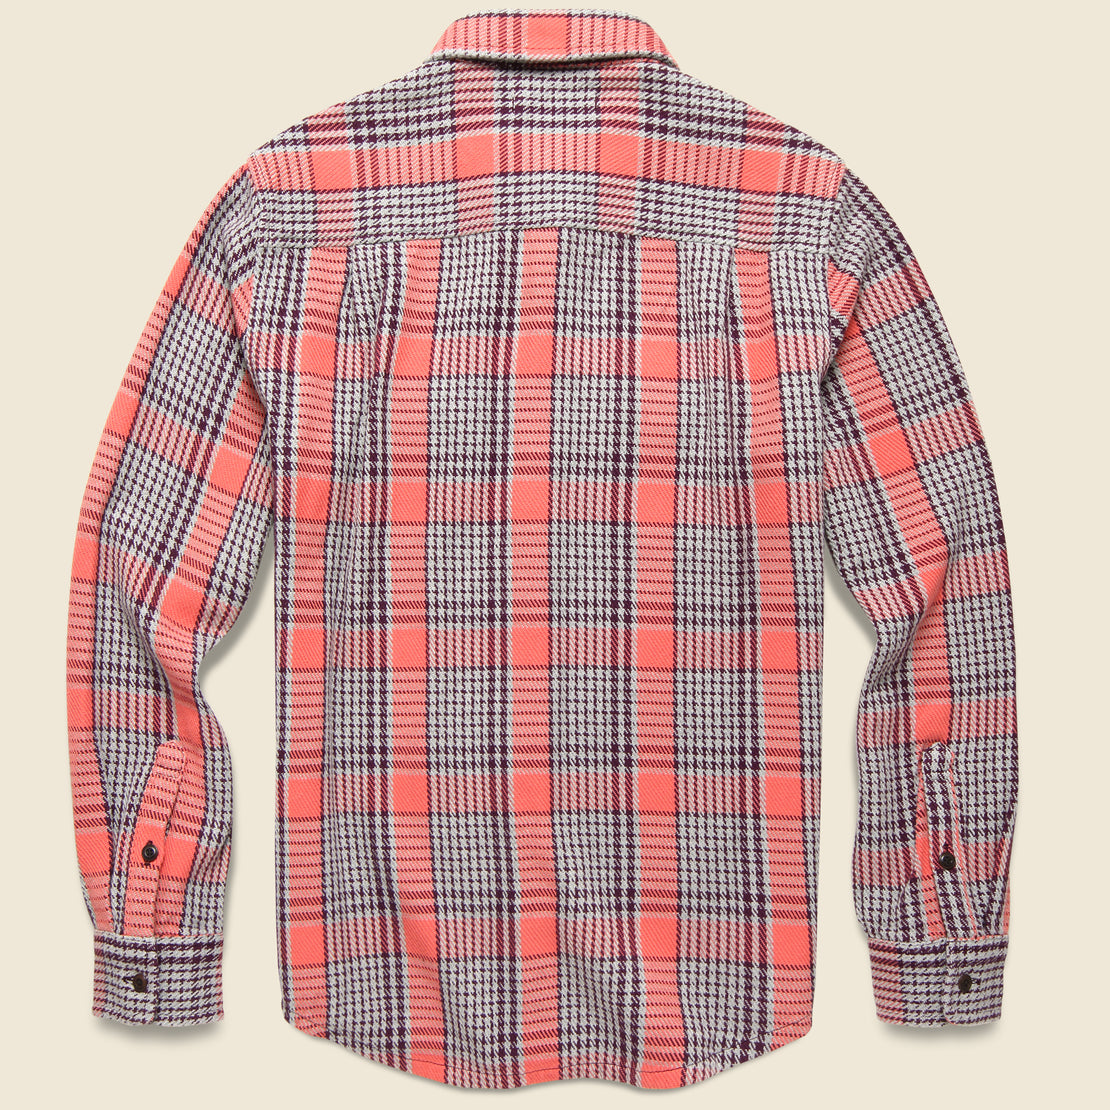 Blanket Shirt - Bright Coral Graph Plaid - Outerknown - STAG Provisions - Tops - L/S Woven - Plaid